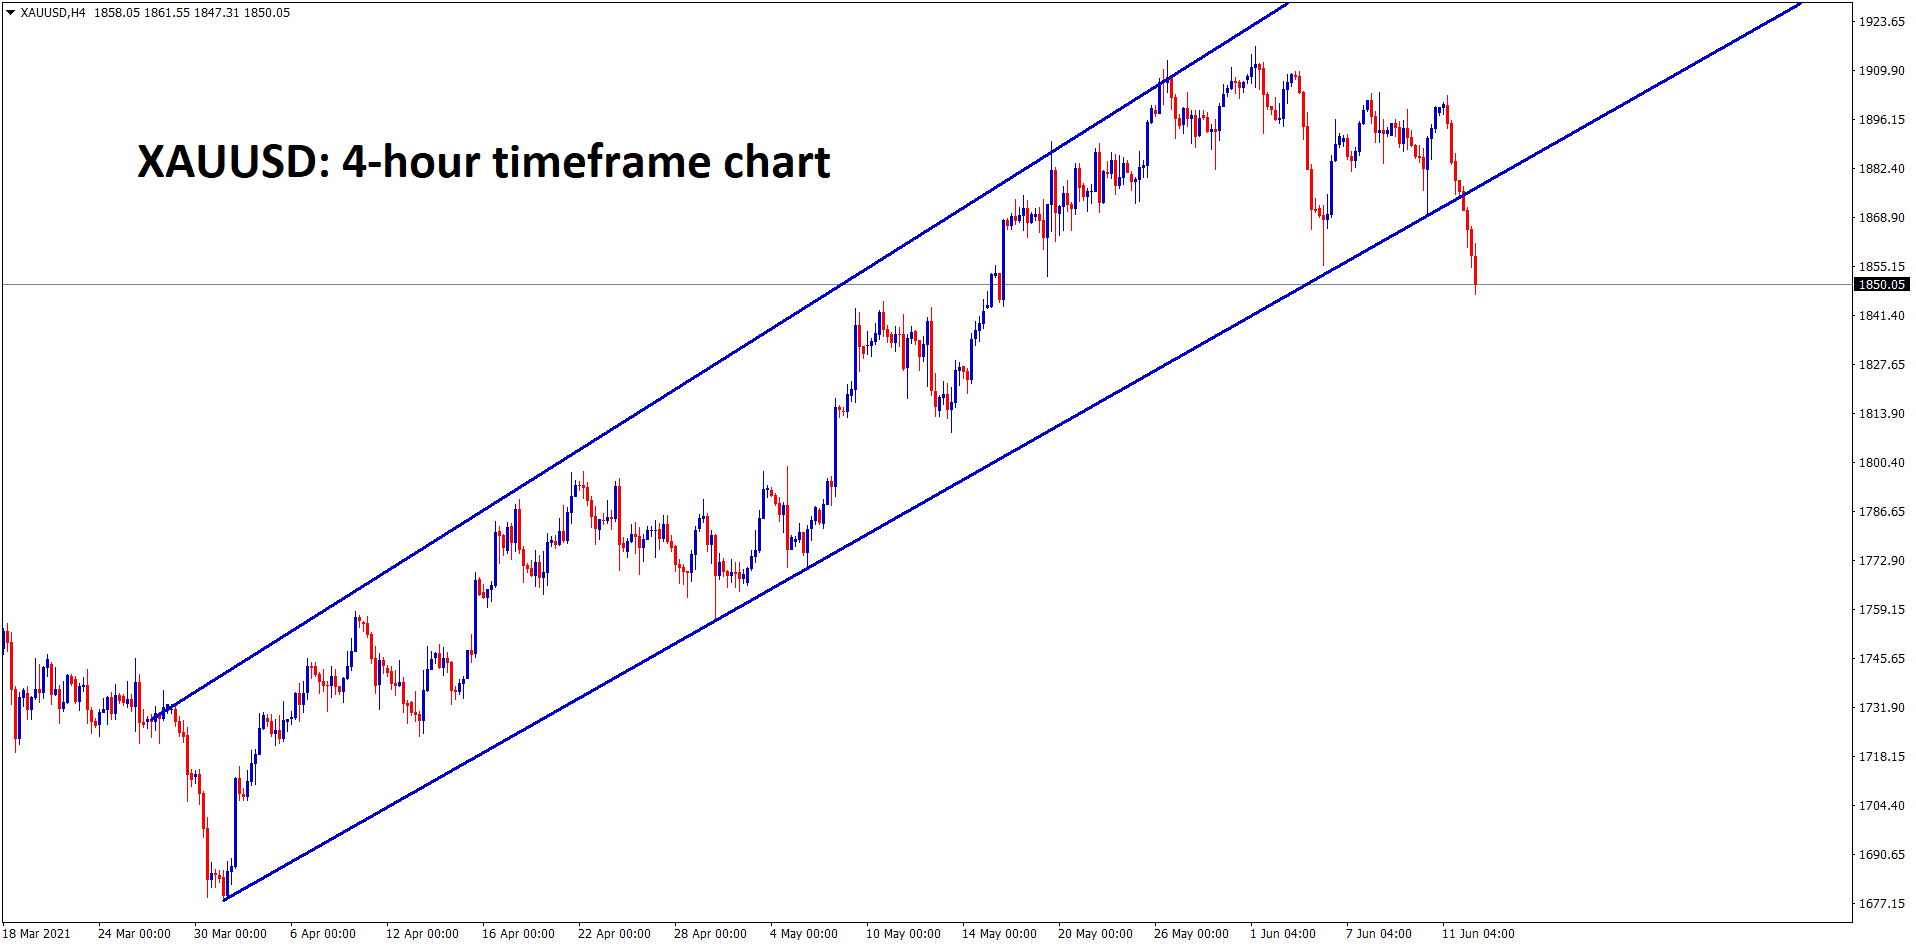 Gold price has broken the bottom of the Ascending Channel